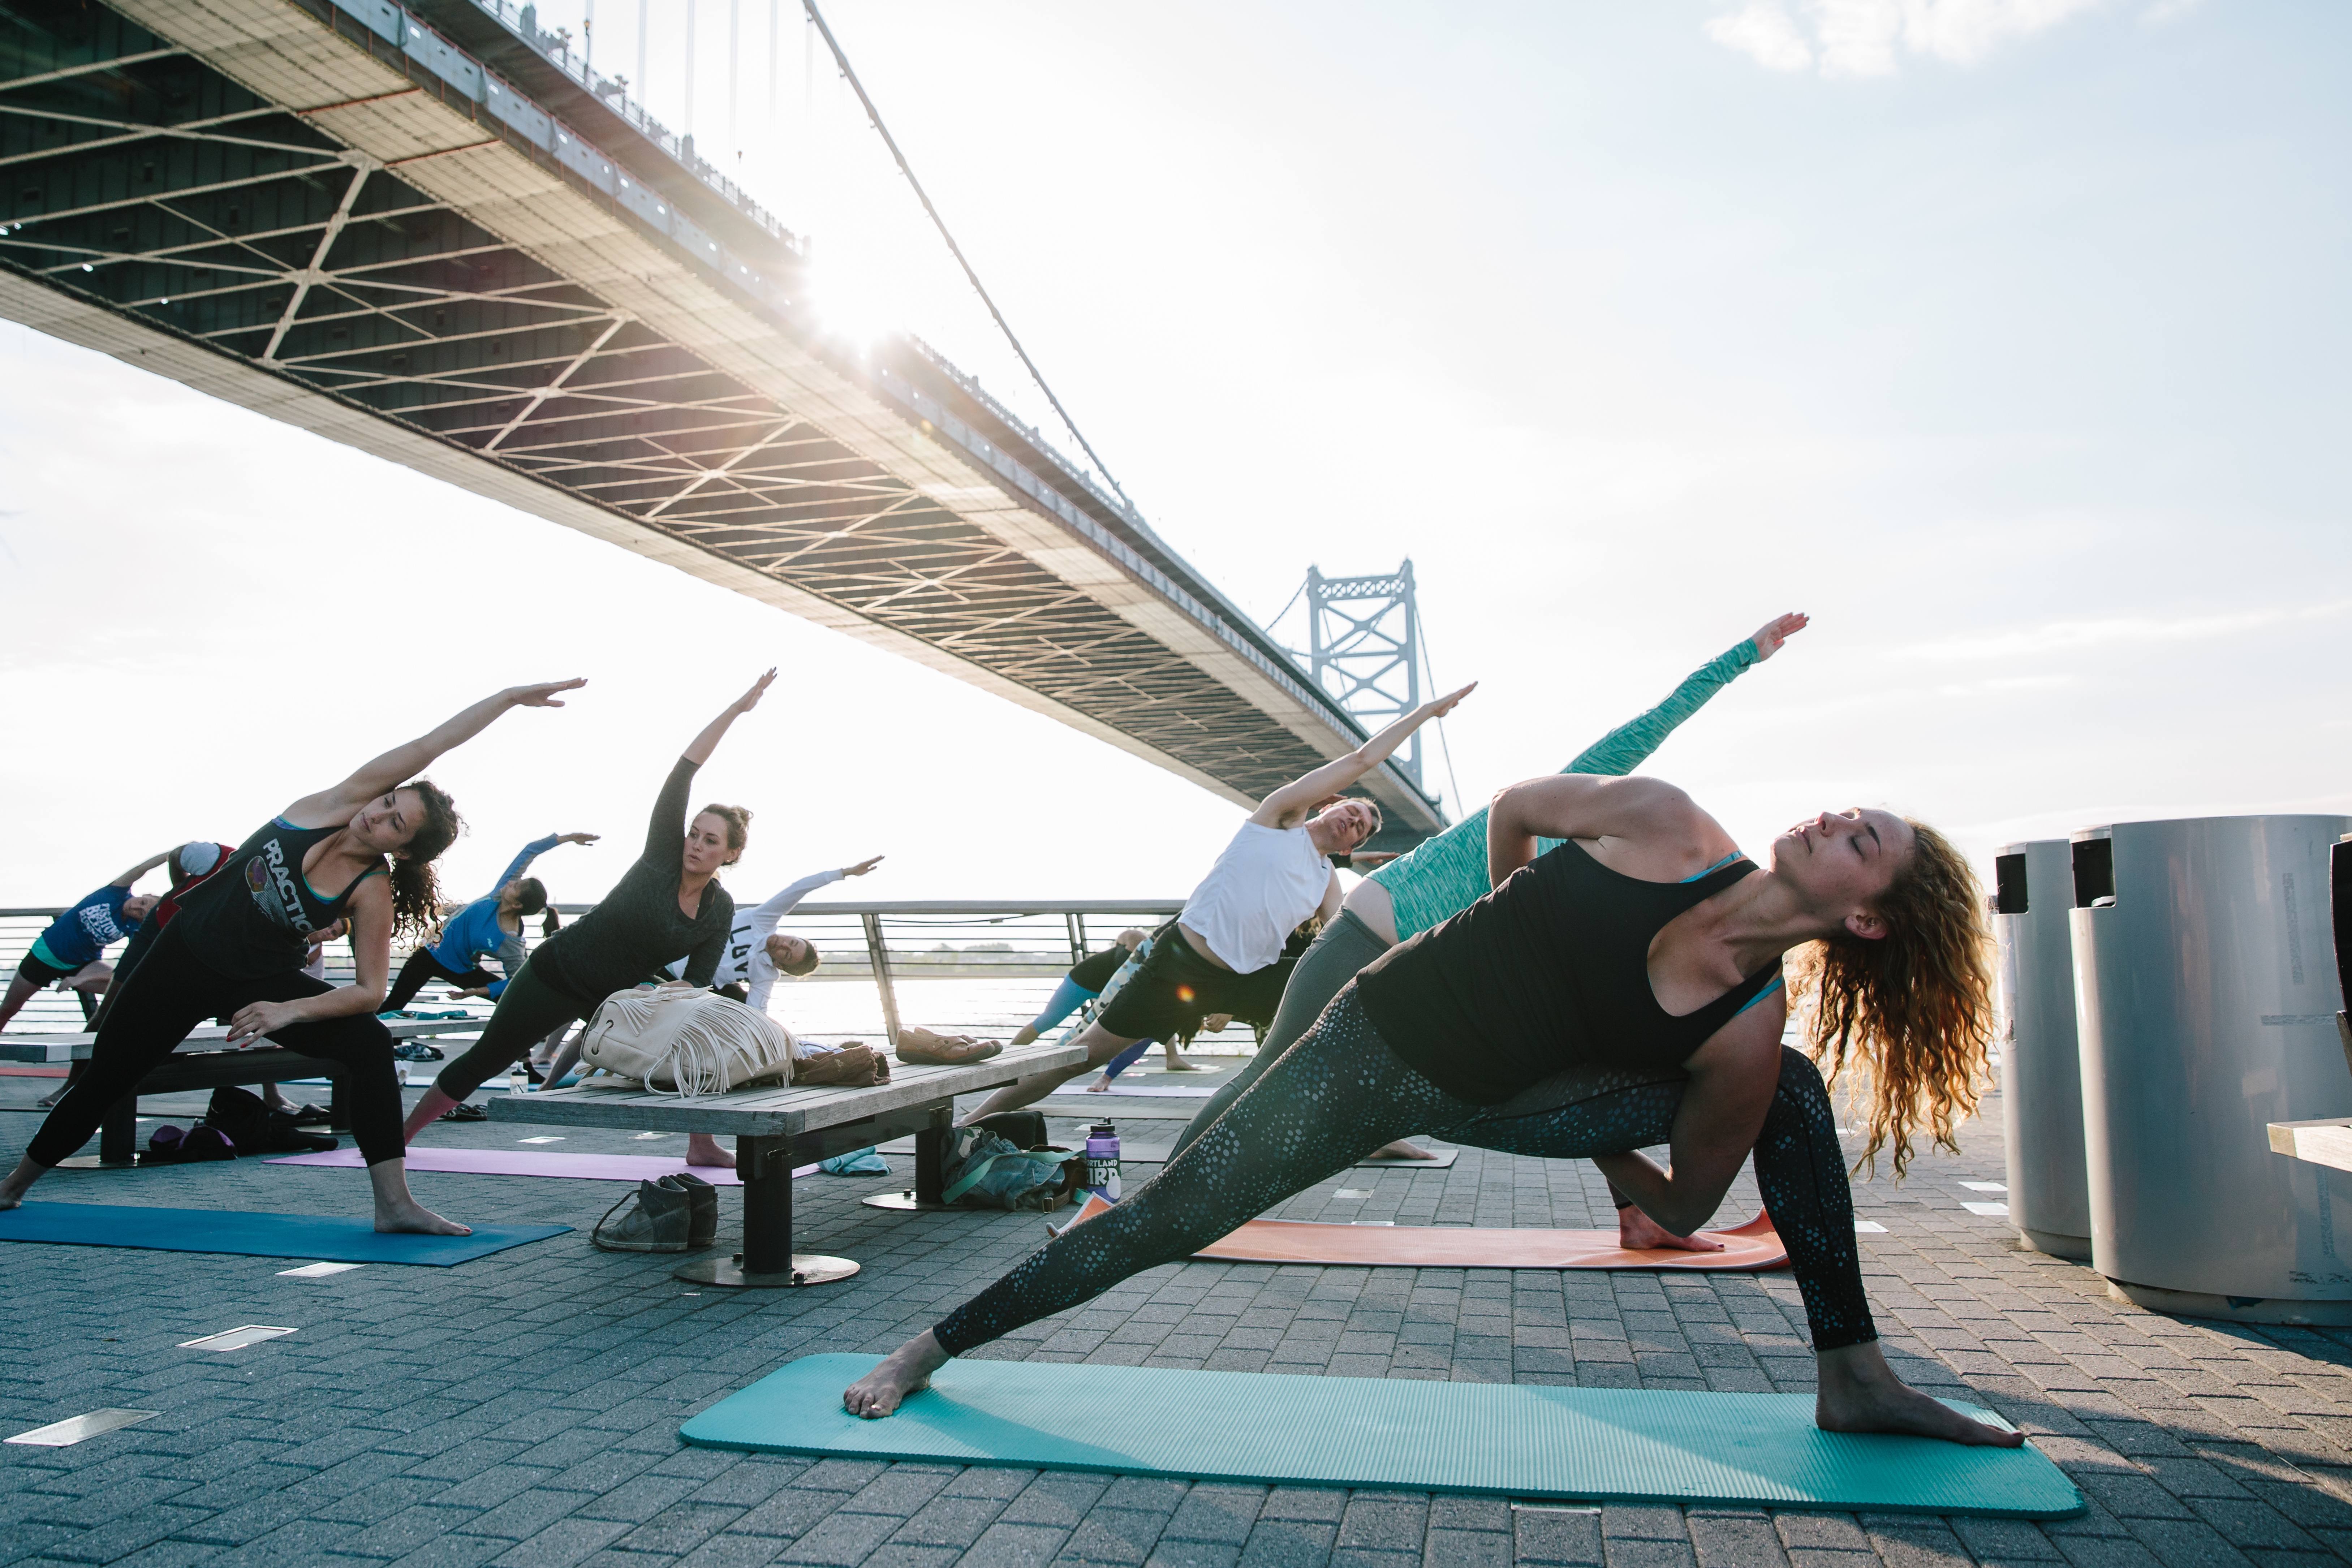 Free Yoga On The Pier Is Returning to the Philly Waterfront